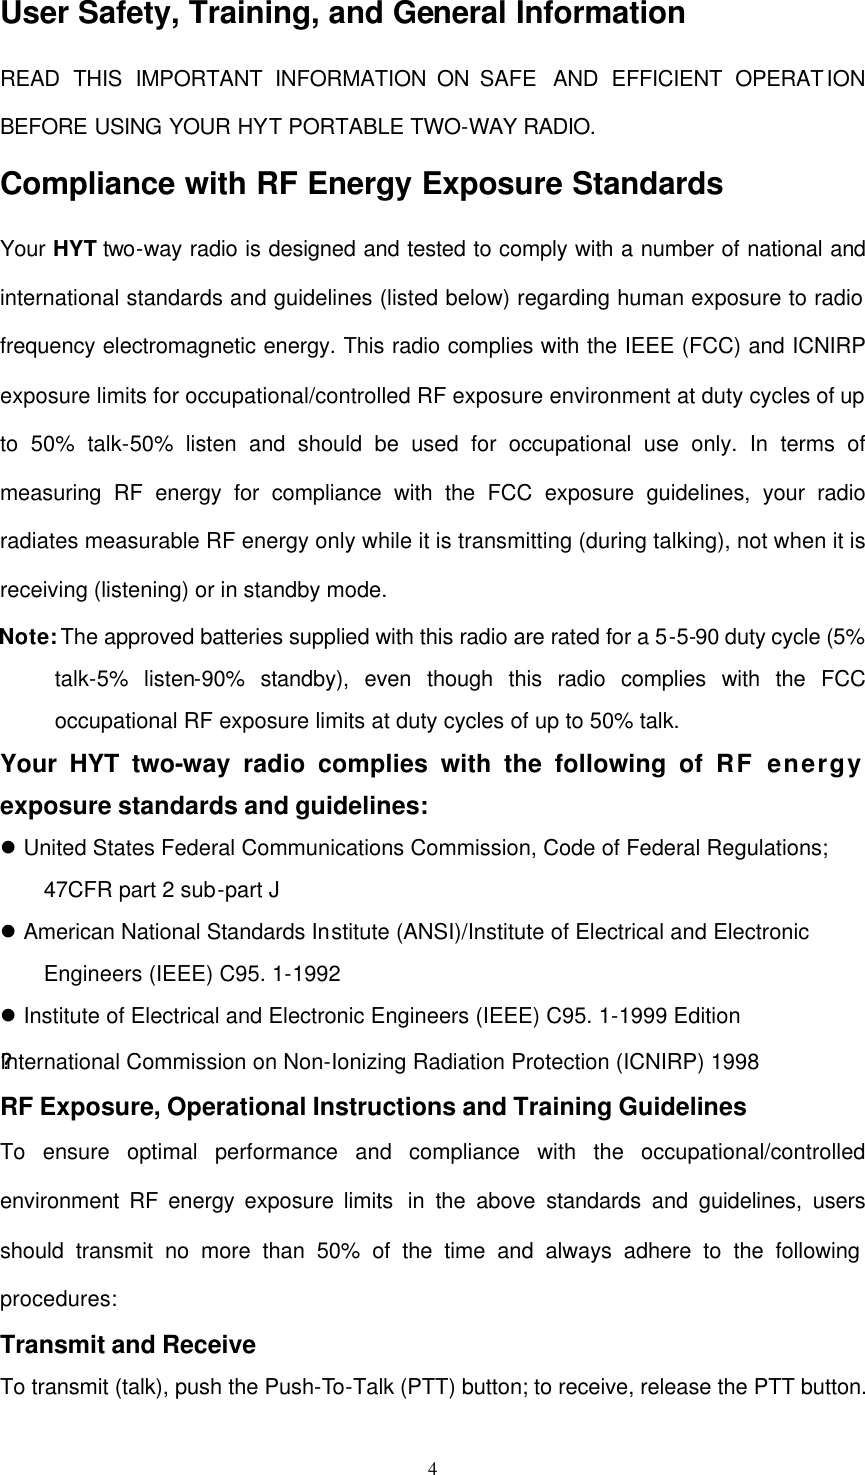  4 User Safety, Training, and General Information READ THIS IMPORTANT INFORMATION ON SAFE  AND EFFICIENT OPERATION BEFORE USING YOUR HYT PORTABLE TWO-WAY RADIO. Compliance with RF Energy Exposure Standards Your HYT two-way radio is designed and tested to comply with a number of national and international standards and guidelines (listed below) regarding human exposure to radio frequency electromagnetic energy. This radio complies with the IEEE (FCC) and ICNIRP exposure limits for occupational/controlled RF exposure environment at duty cycles of up to 50% talk-50% listen and should be used for occupational use only. In terms of measuring RF energy for compliance with the FCC exposure guidelines, your radio radiates measurable RF energy only while it is transmitting (during talking), not when it is receiving (listening) or in standby mode. Note: The approved batteries supplied with this radio are rated for a 5-5-90 duty cycle (5% talk-5% listen-90% standby), even though this radio complies with the FCC occupational RF exposure limits at duty cycles of up to 50% talk. Your HYT two-way radio complies with the following of RF energy exposure standards and guidelines: l United States Federal Communications Commission, Code of Federal Regulations; 47CFR part 2 sub-part J l American National Standards Institute (ANSI)/Institute of Electrical and Electronic Engineers (IEEE) C95. 1-1992 l Institute of Electrical and Electronic Engineers (IEEE) C95. 1-1999 Edition ??International Commission on Non-Ionizing Radiation Protection (ICNIRP) 1998 RF Exposure, Operational Instructions and Training Guidelines To ensure optimal performance and compliance with the occupational/controlled environment RF energy exposure limits  in the above standards and guidelines, users should transmit no more than 50% of the time and always adhere to the following procedures: Transmit and Receive To transmit (talk), push the Push-To-Talk (PTT) button; to receive, release the PTT button. 